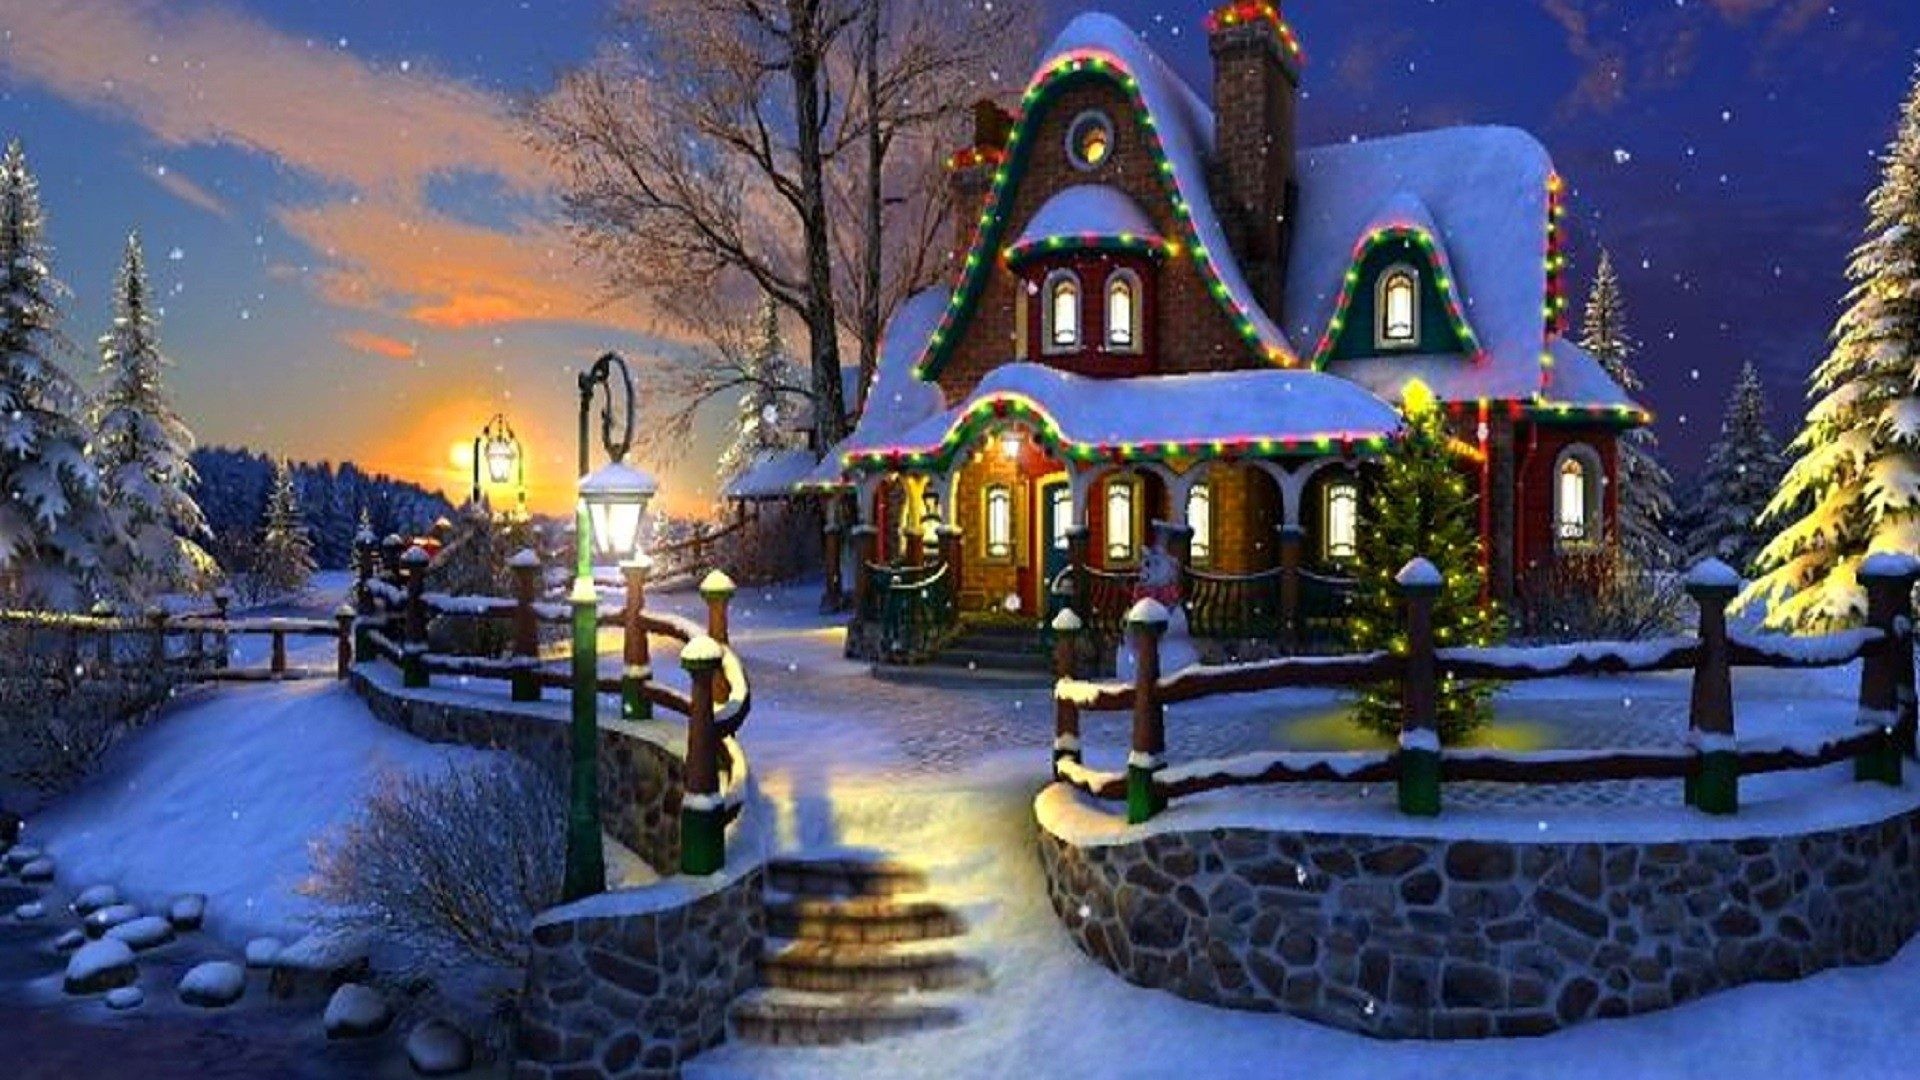 1920x1080 Festivals Tag - Awesome Cottage Xmas New Year Festivals Christmas  Attractions Dreams Paintings Bridge Trees Beautiful